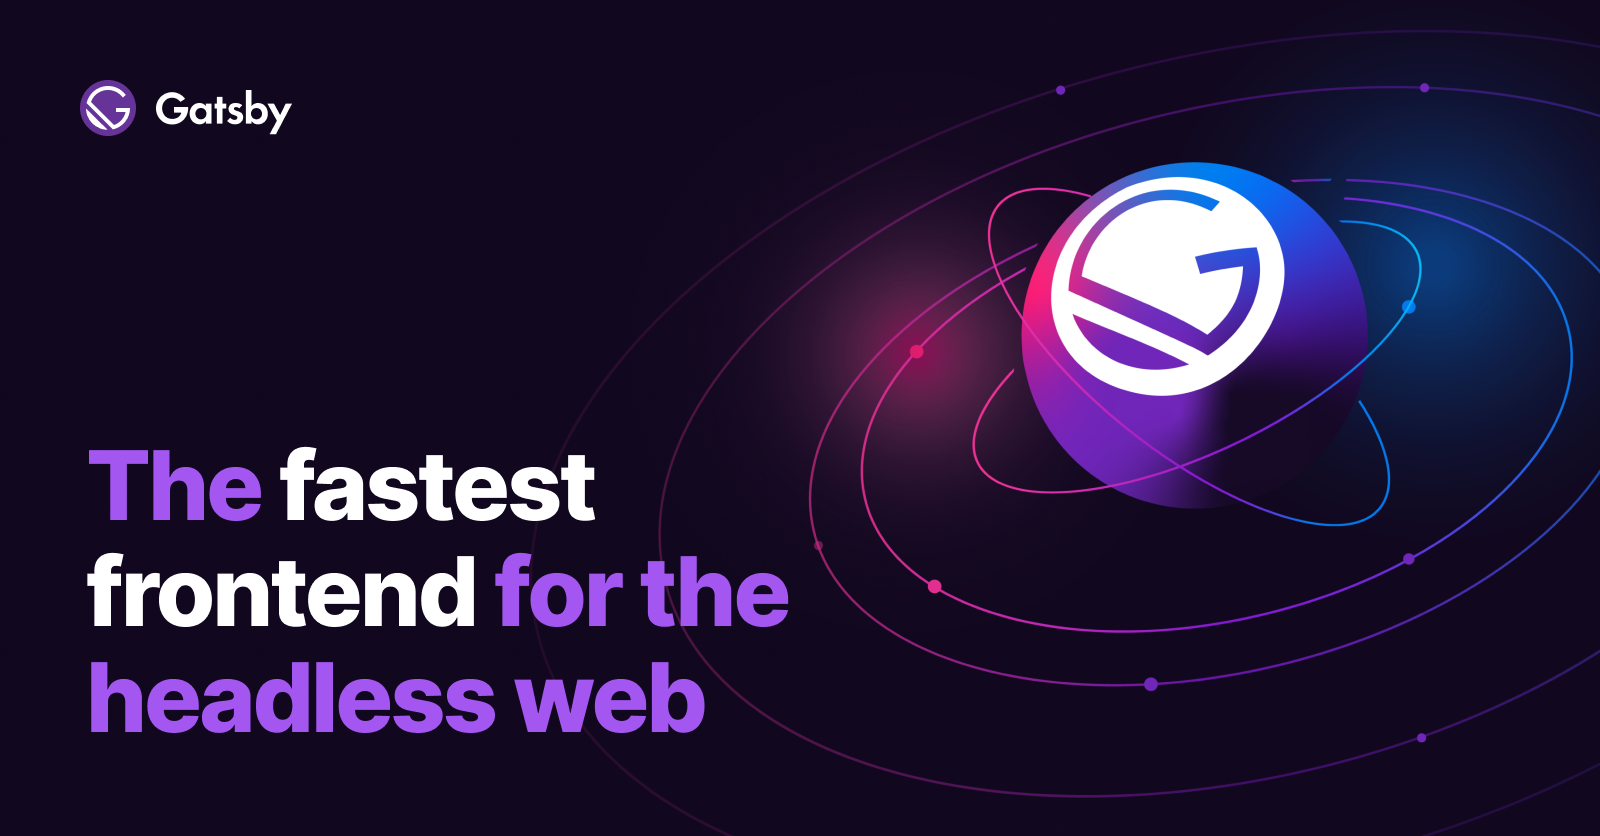 Gatsby: The Fastest Frontend for the Headless Web